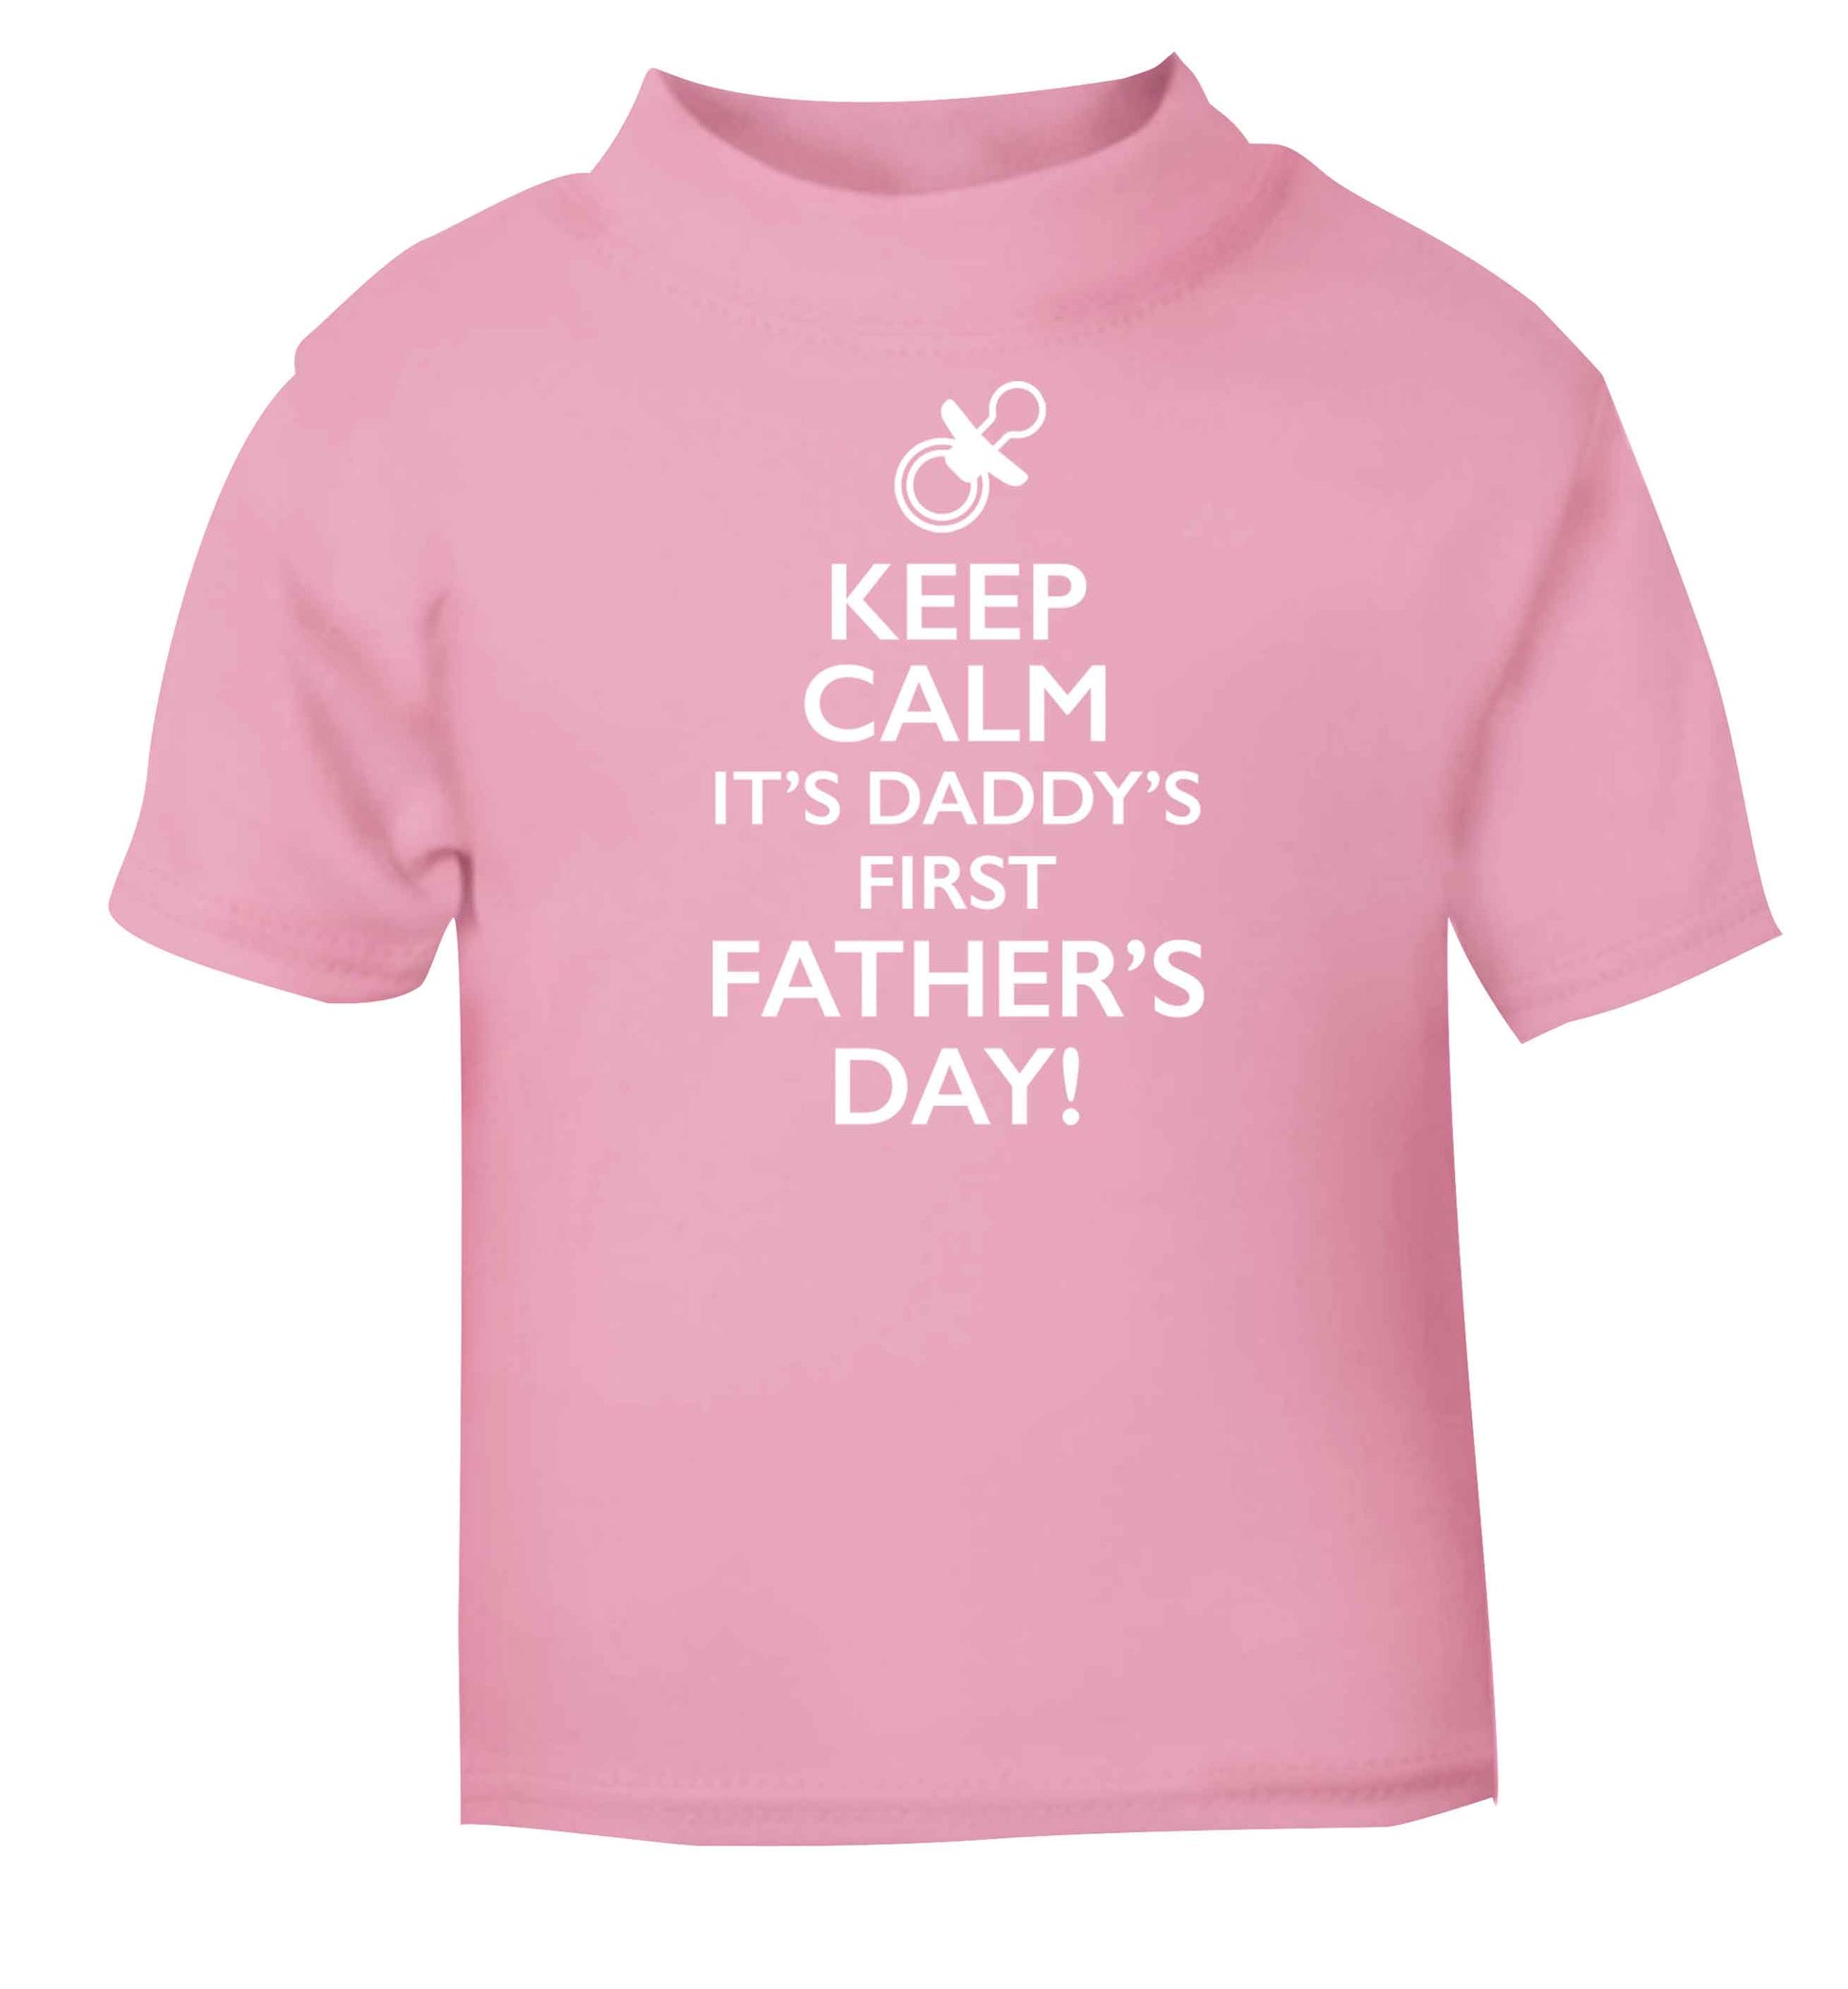 Keep calm it's daddys first father's day light pink baby toddler Tshirt 2 Years